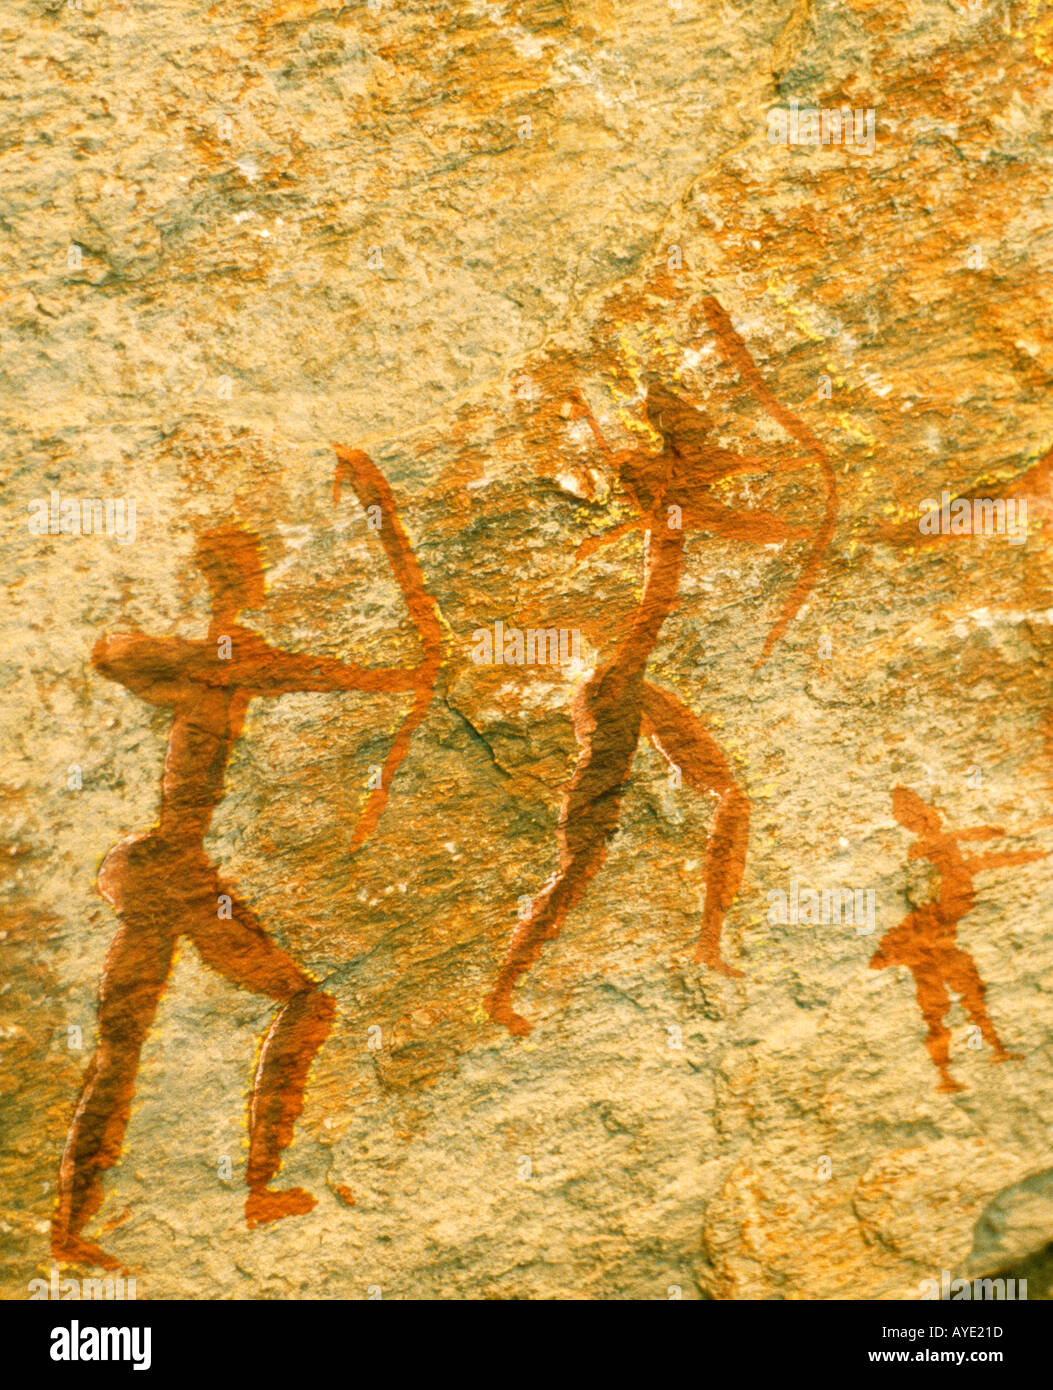 South Africa Bushman rock painting of hunters with bows and arrows Stock Photo